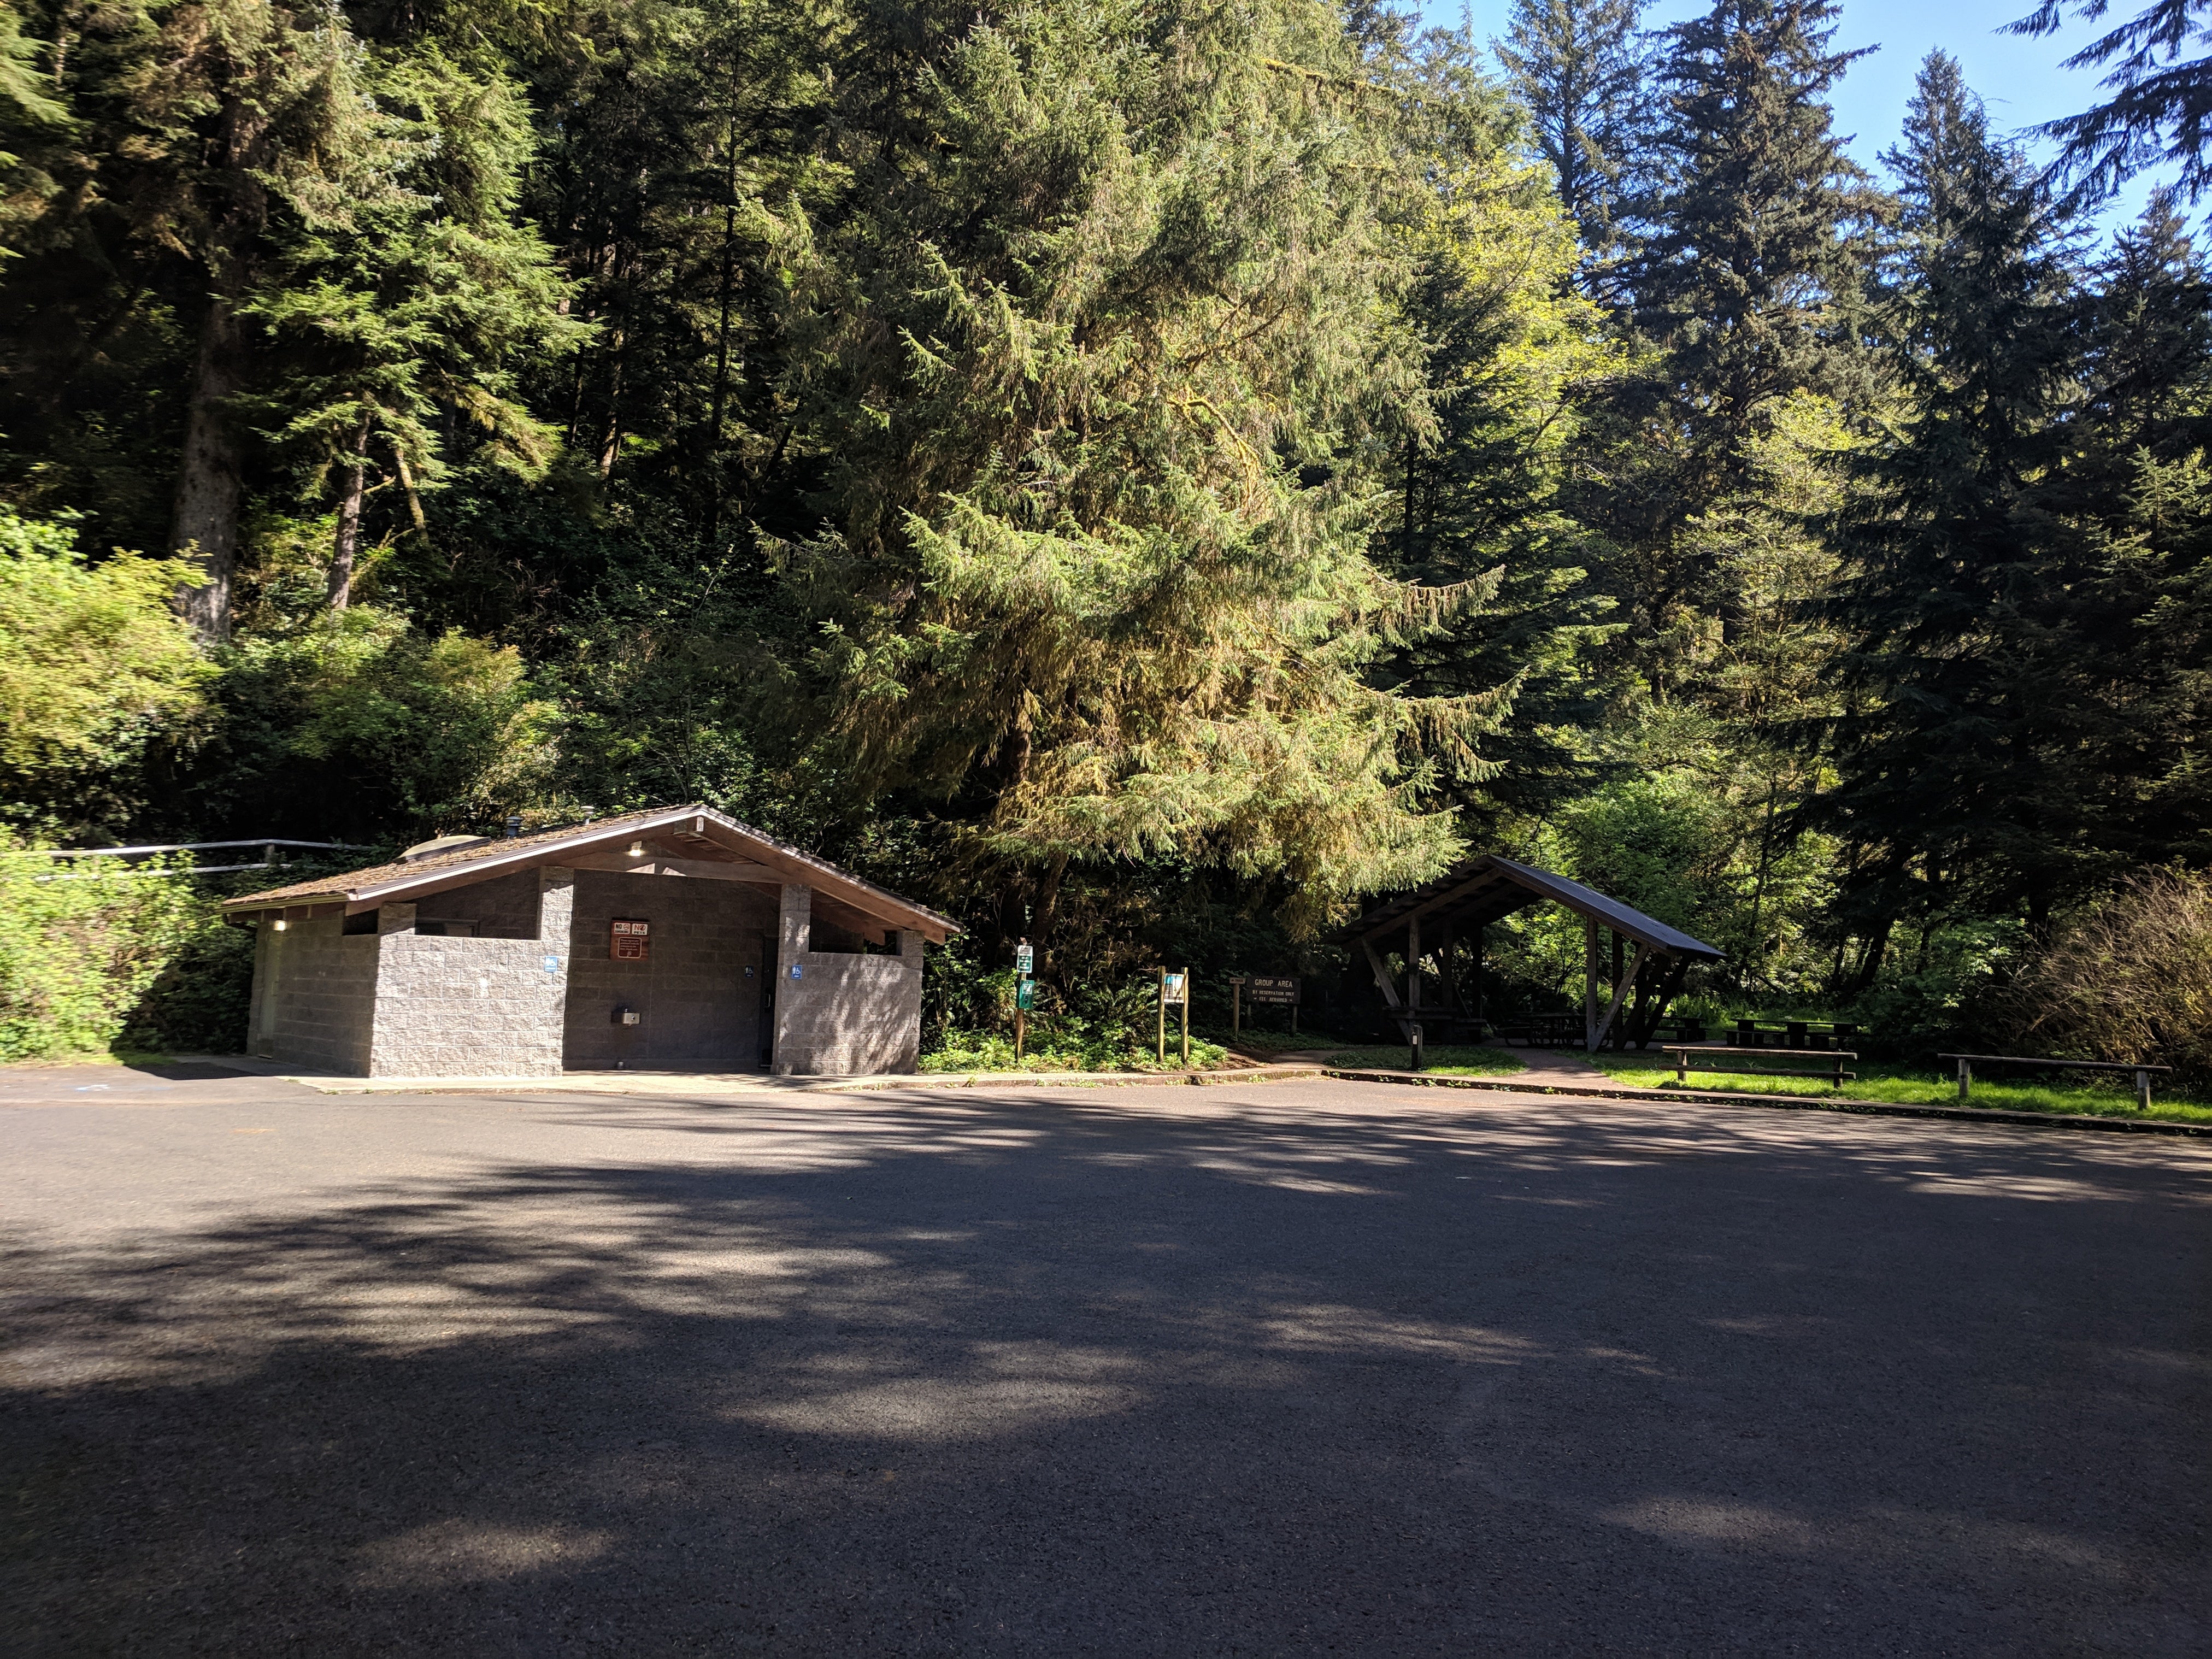 One of the many bath houses at. Cape Perpetua campground. Men's and women's flush toilets and sinks. Nothing fancy, but clean, and much appreciated! In the background you can see the group camp pavilion.